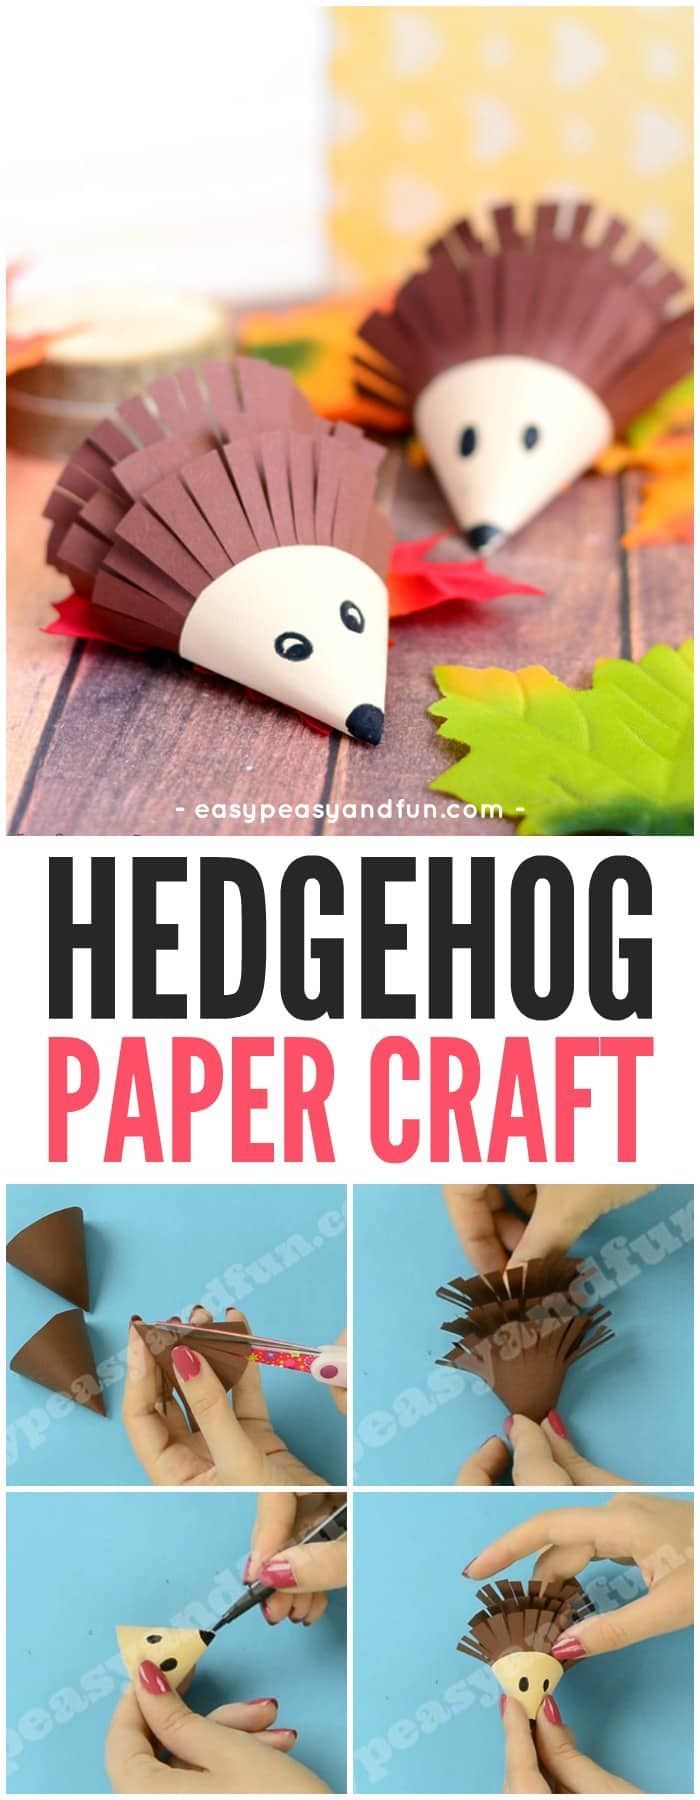 Cute Hedgehog Paper Craft Idea for Kids! A cute way to work on scissor skills this fall with preschool and kindergarten kids!